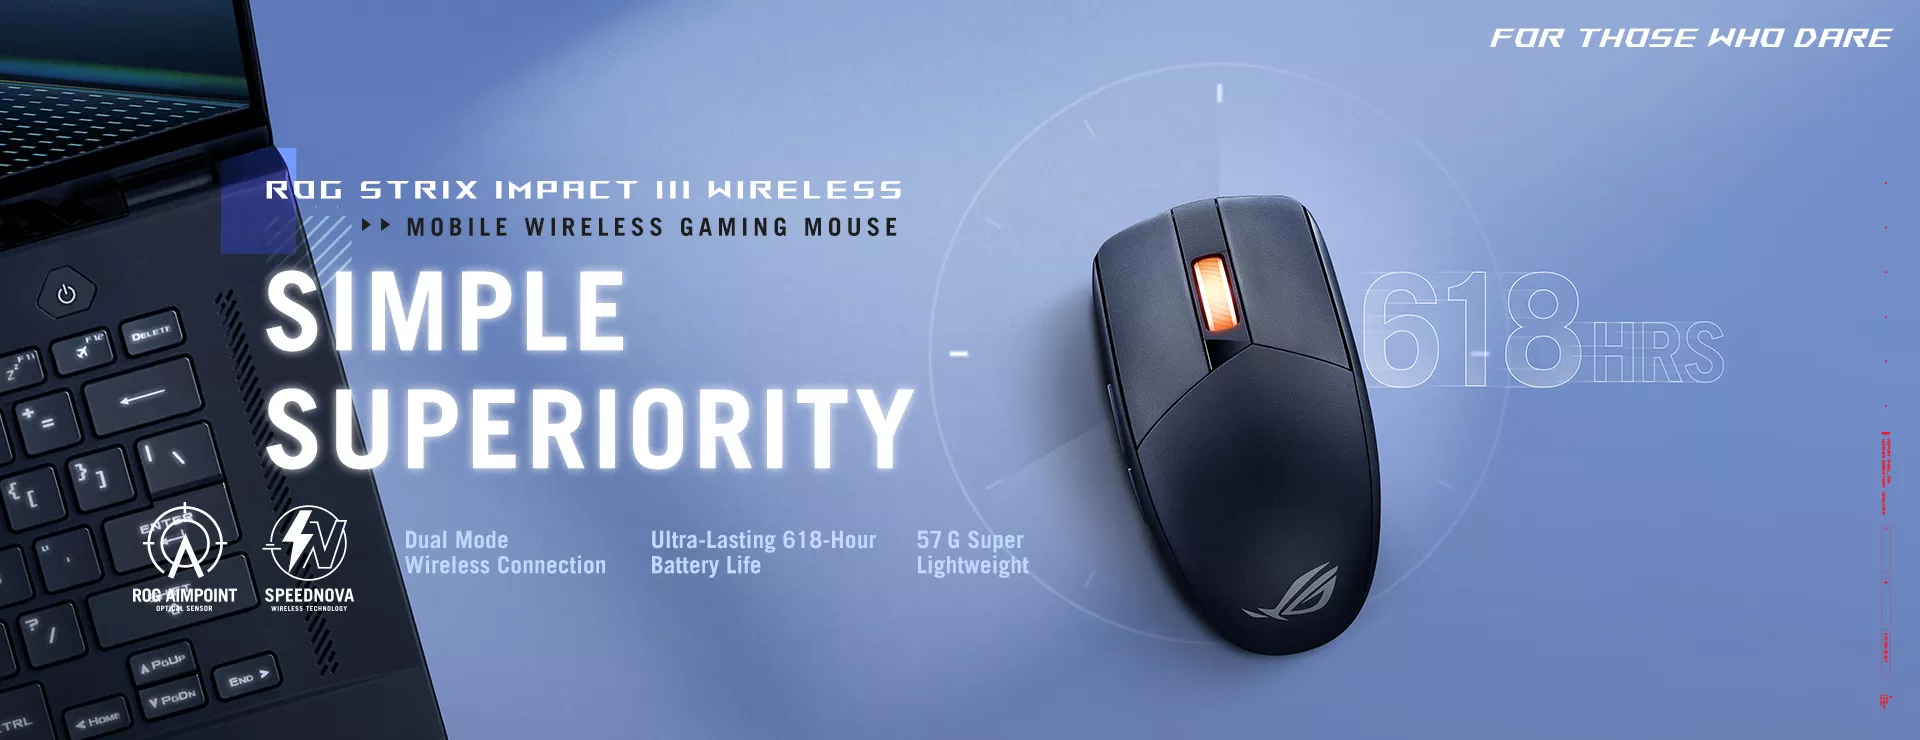 The ROG Strix Impact III Wireless on a white tabletop beside a black laptop. 618 Hours is labeled beside the mouse to show the hours of battery life it has